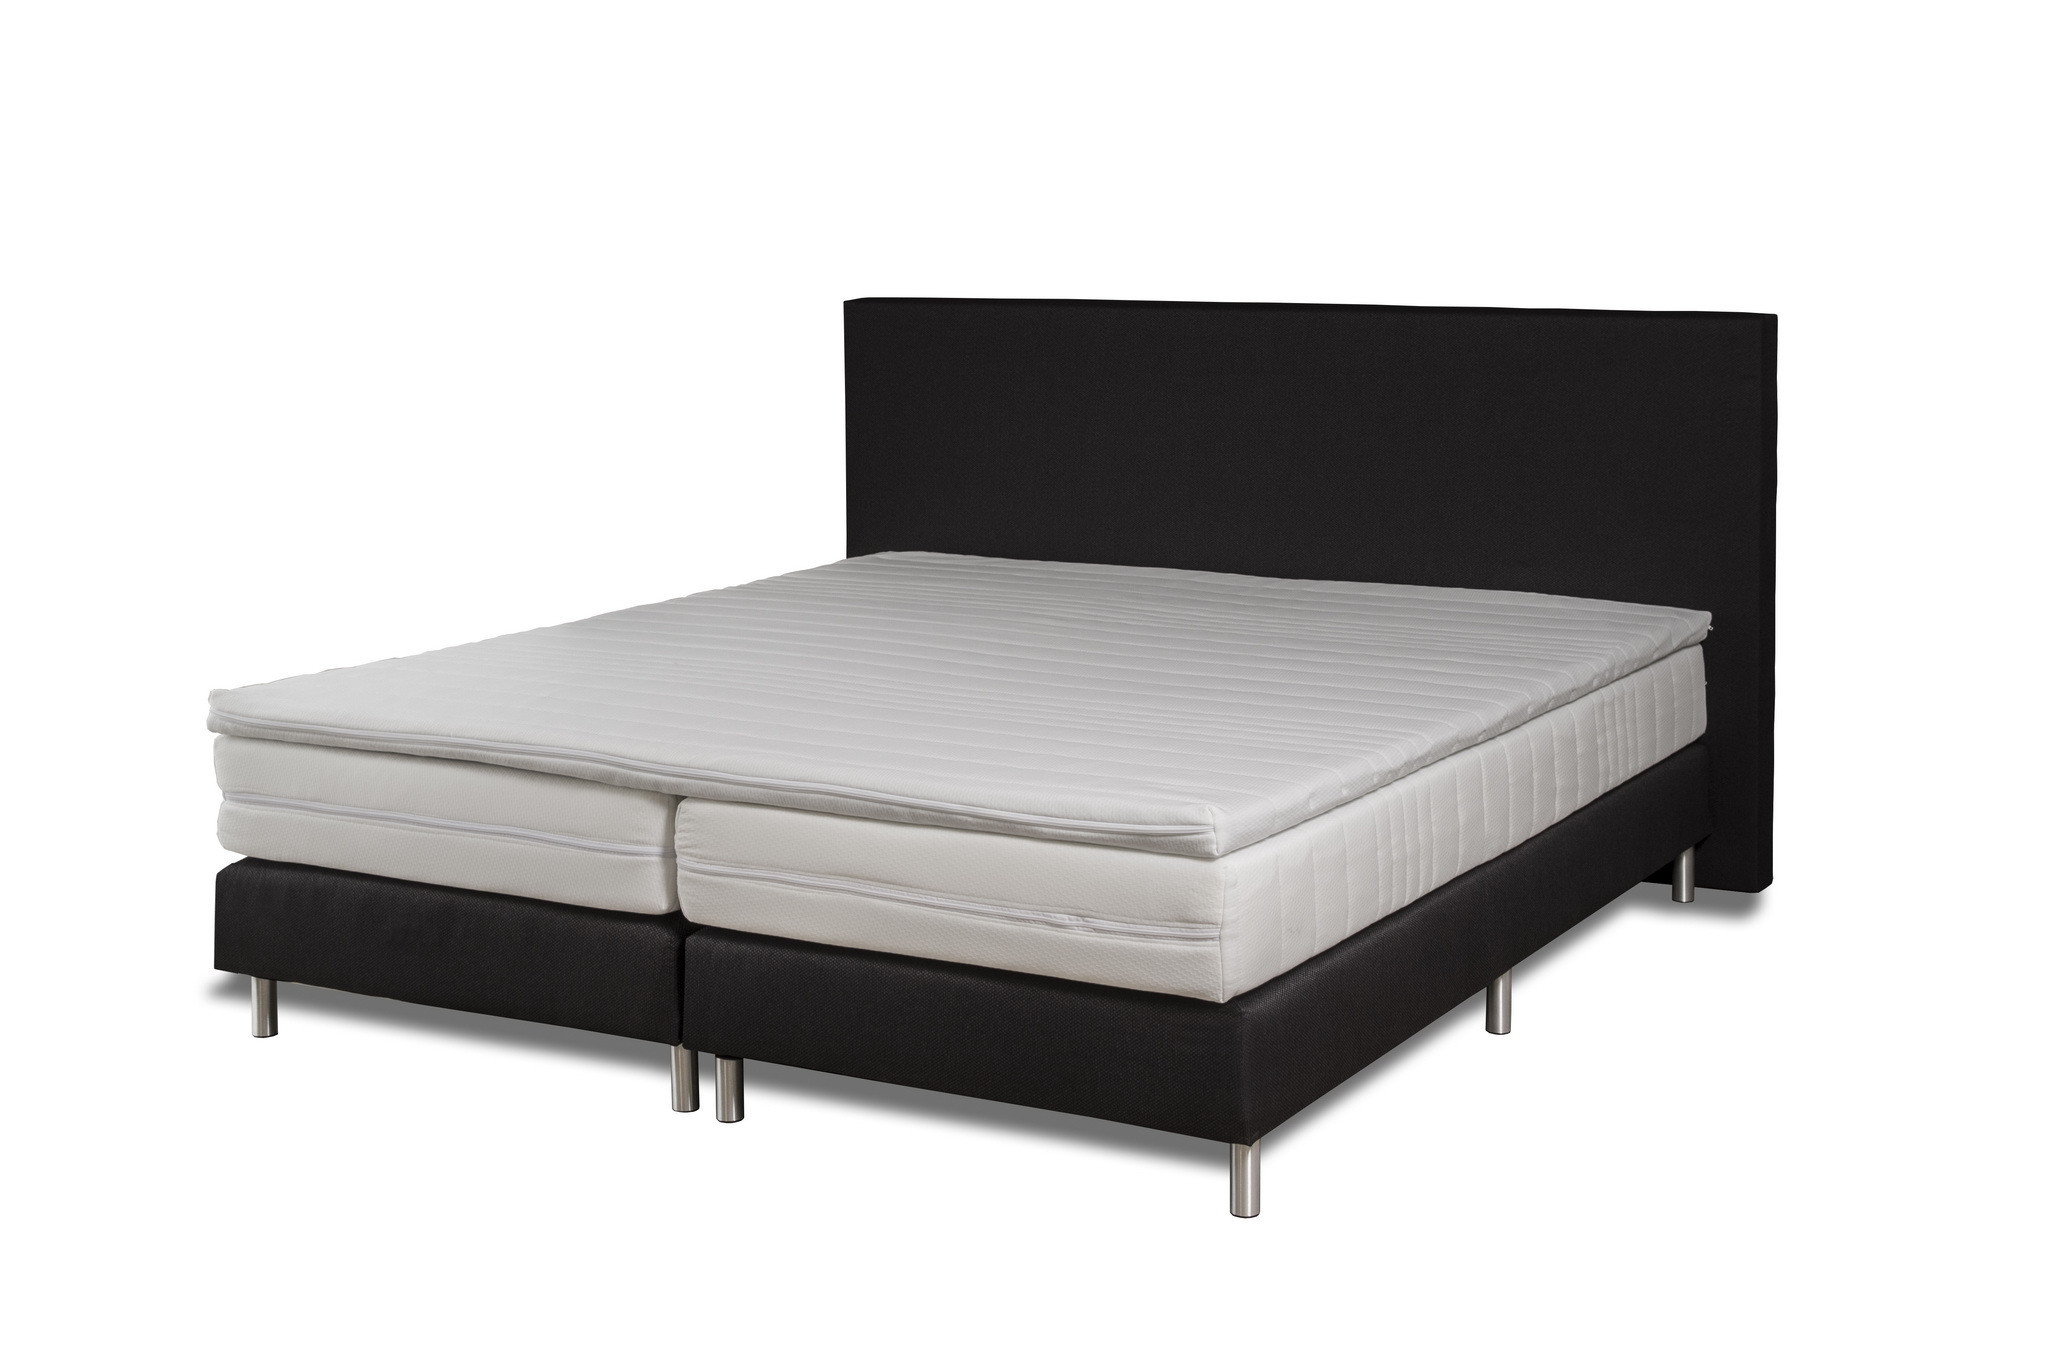 Rent a Boxspring bed 2 persons 180x210? Rent at KeyPro furniture rental!